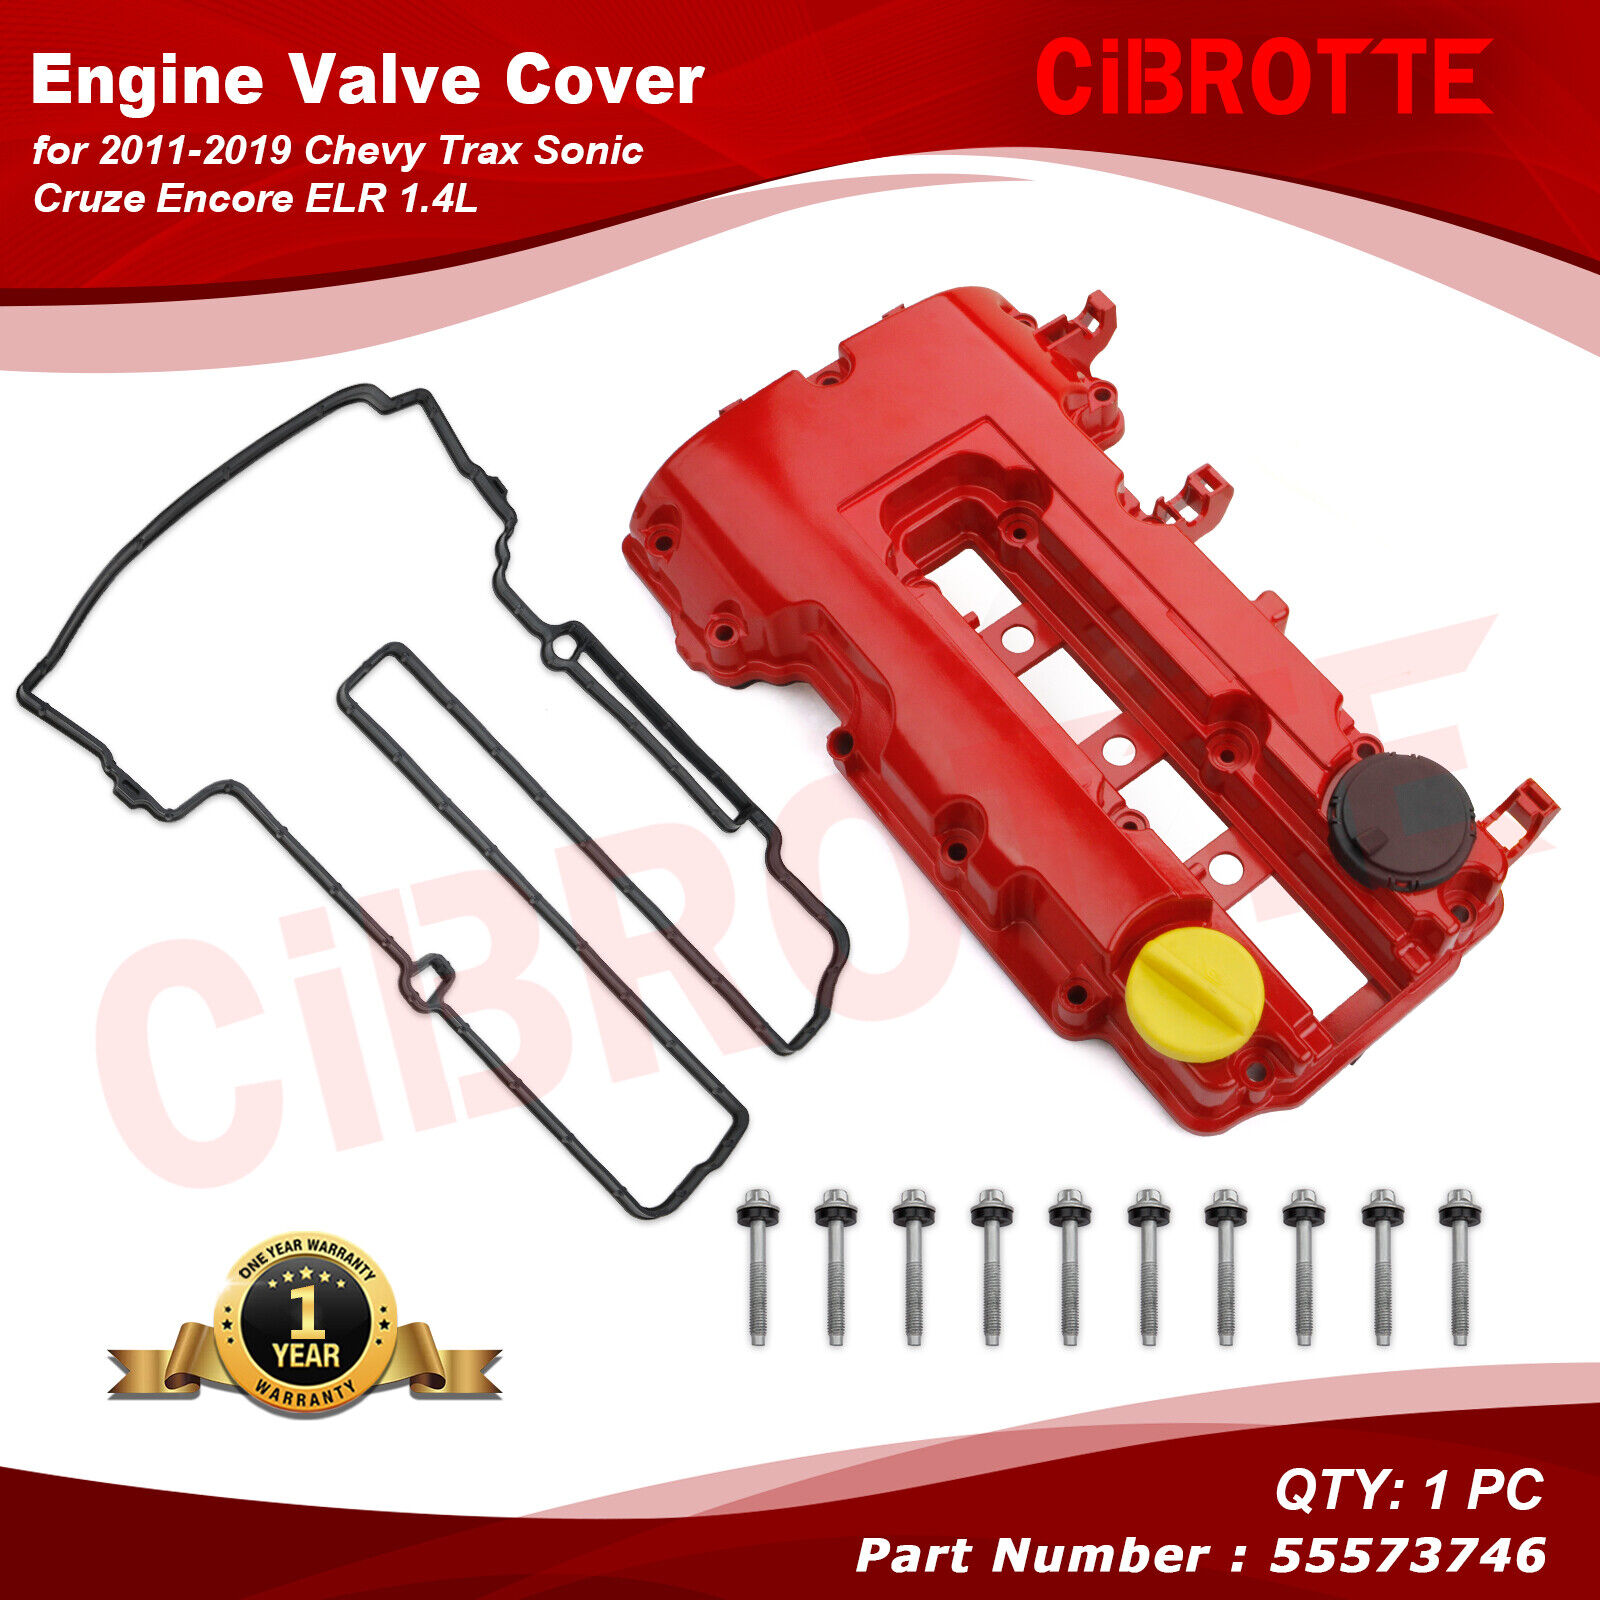 Upgrade Performance Aluminum Valve Cover for 11-19 Chevy Trax Sonic Cruze 1.4L🏅